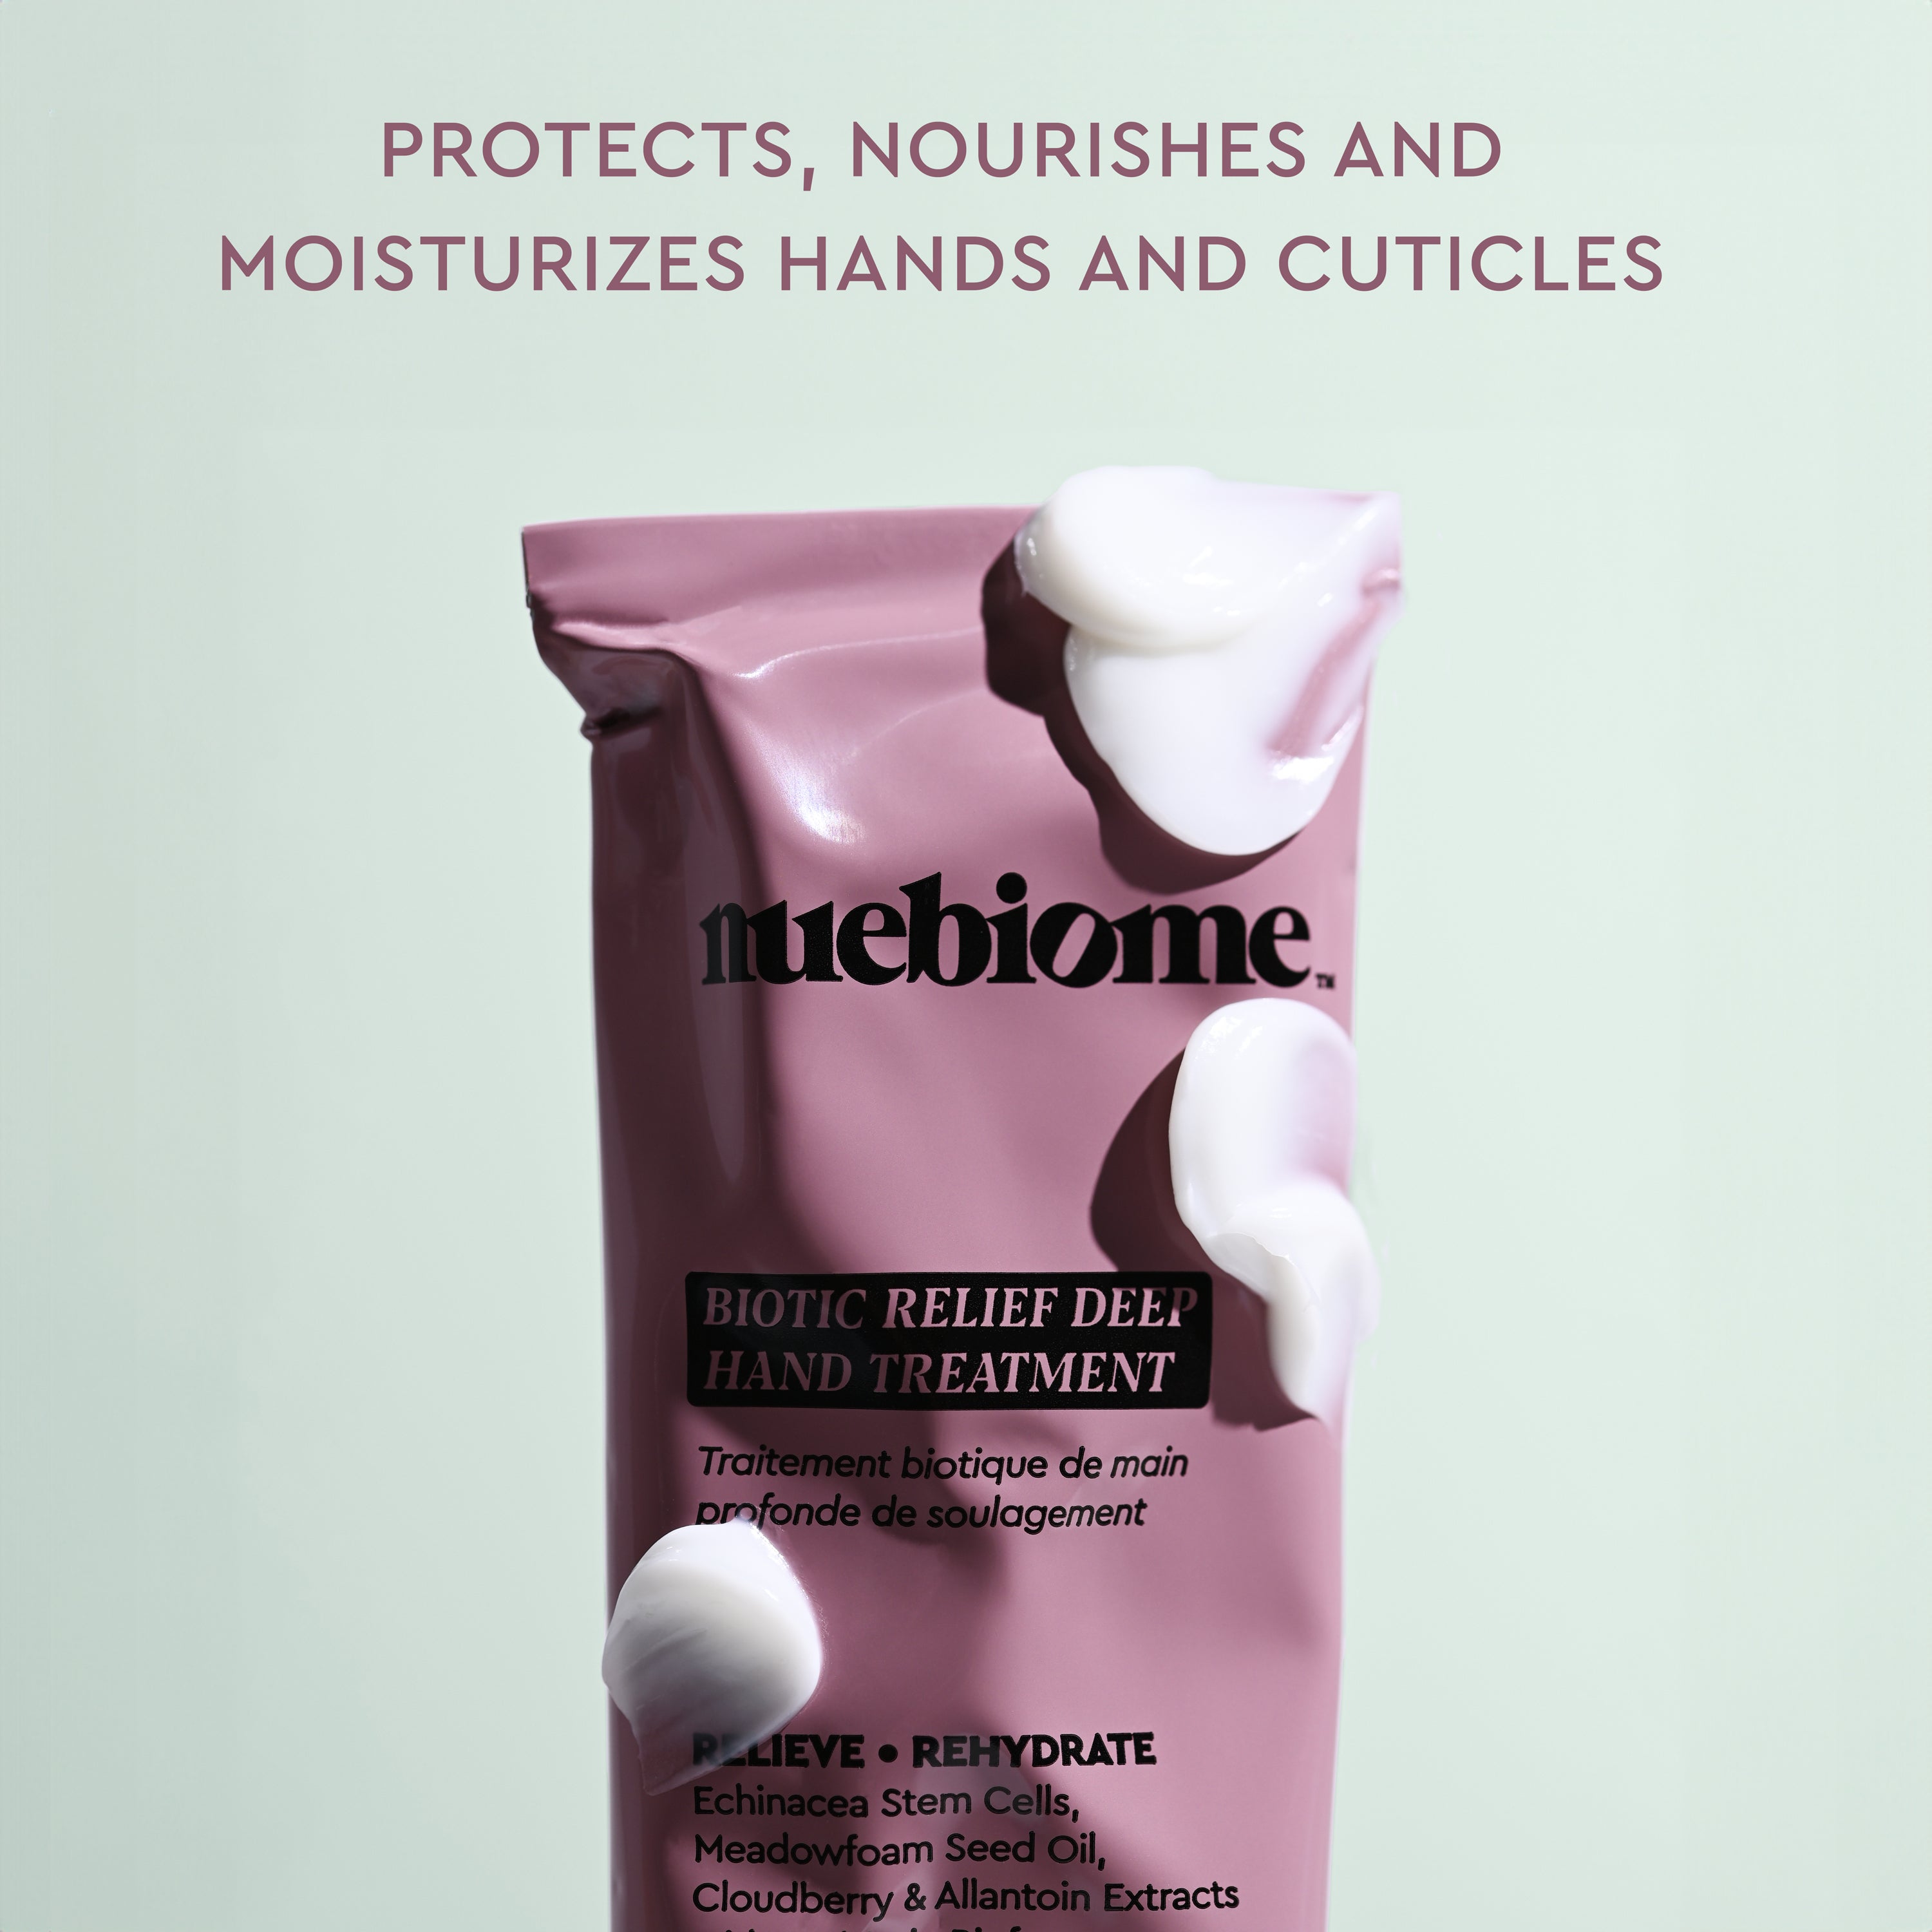 nuebiome hand cream nourishes dry hands and cuticle